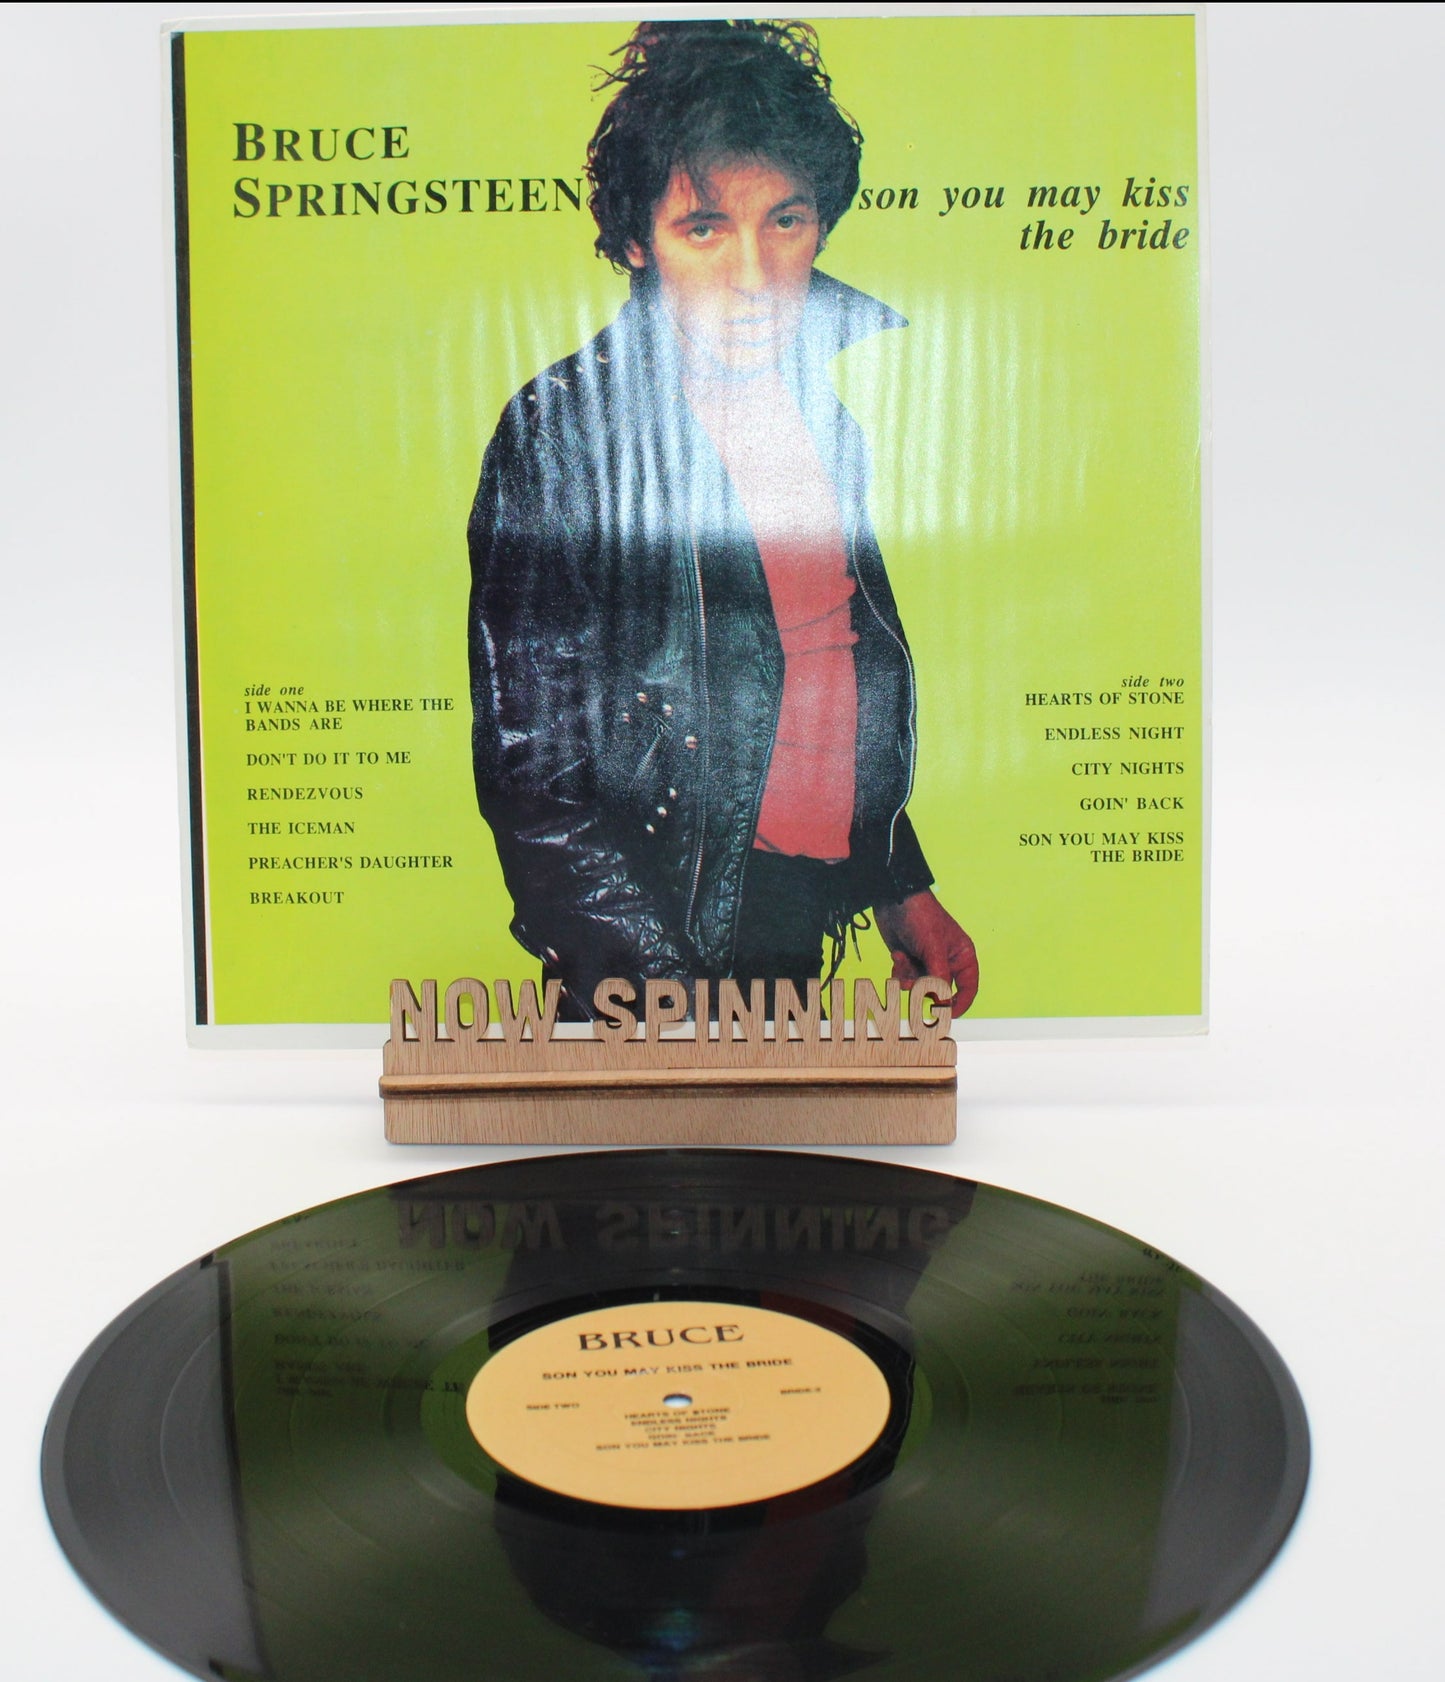 Bruce Springsteen - Son You May Kiss The Bride - LP 12" Vinyl - Excellent Condition BLV